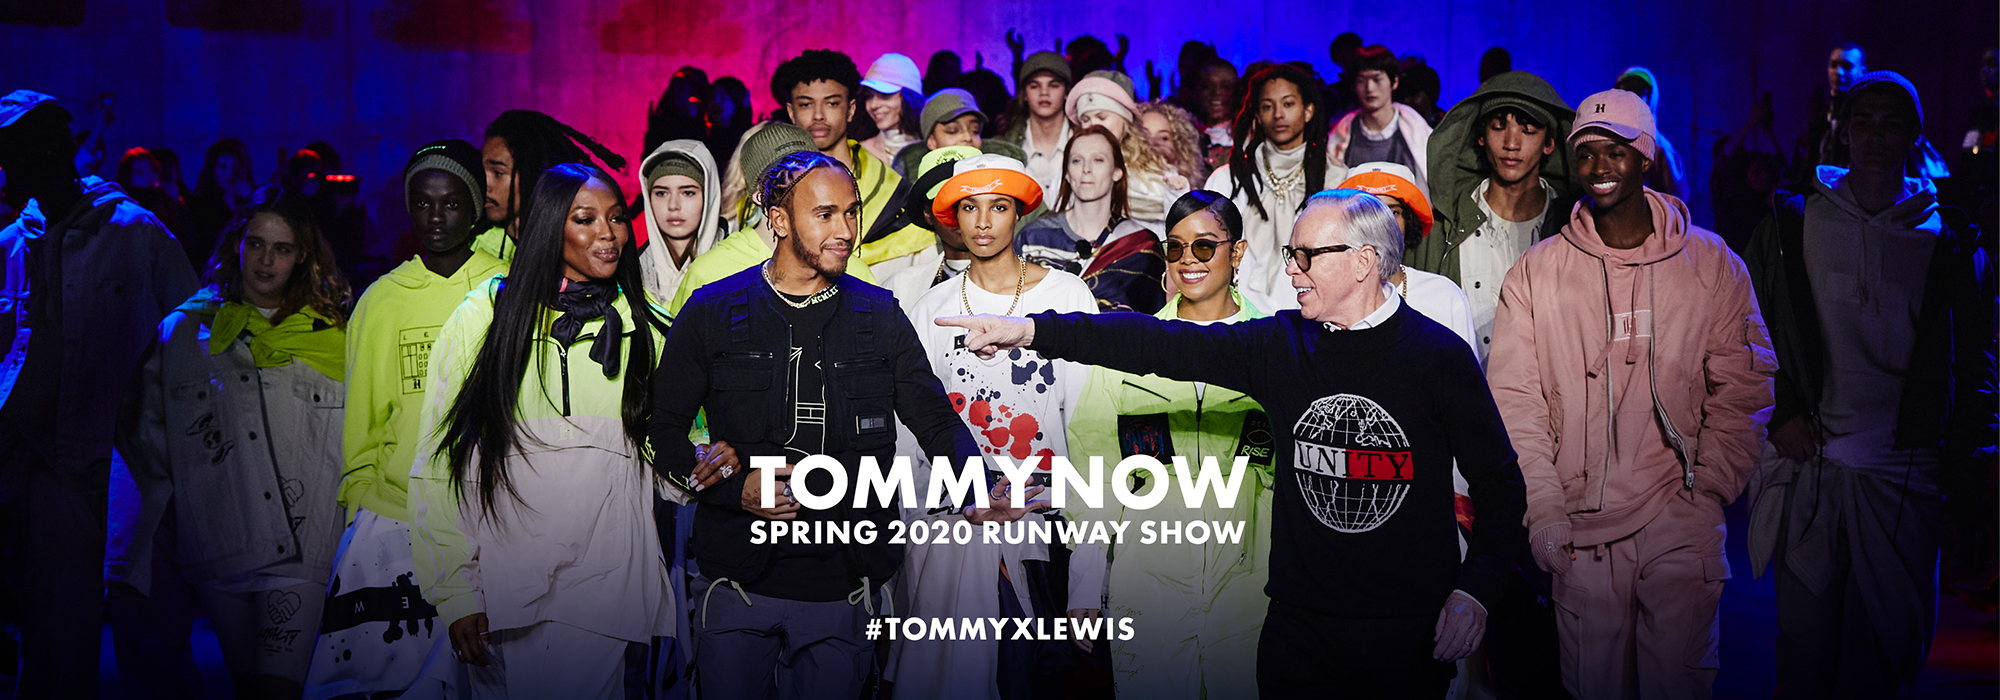 TOMMYNOW DRIVE – Tommy Hilfiger